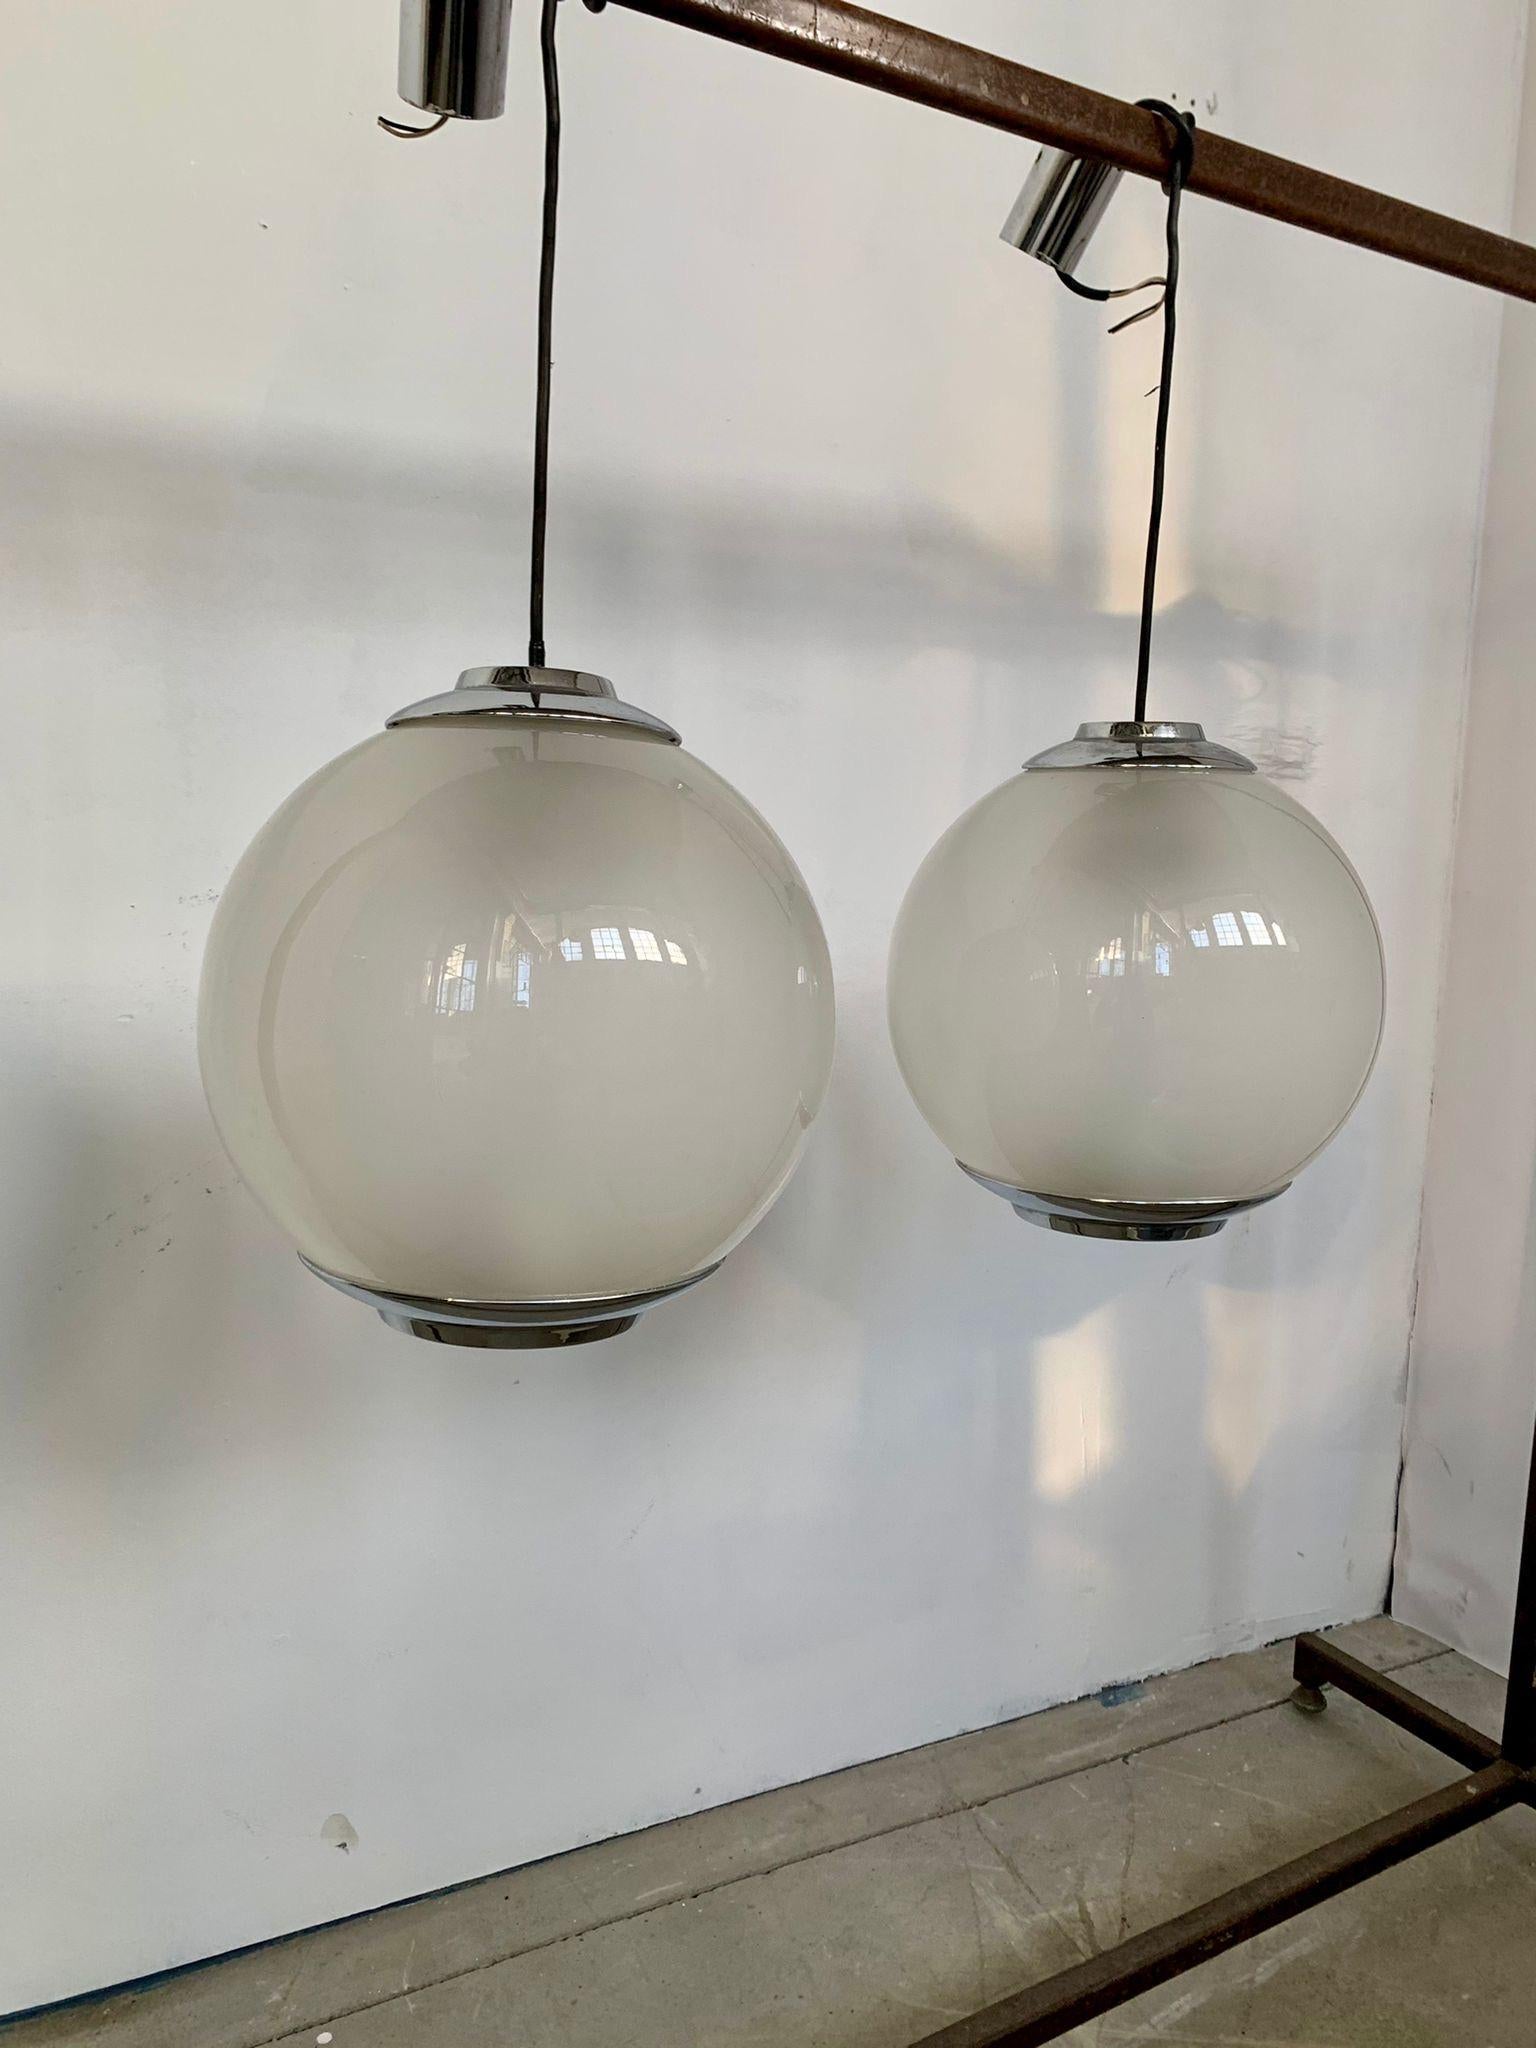 Set of chandeliers model LS2 by Luigi Caccia Dominioni manufactured by Azucena, 1960s

Opaline glass and steel chandeliers.
Designed by Luigi Caccia Dominioni and produced by Azucena. 

Good condition,  signs of time, evident in photo.